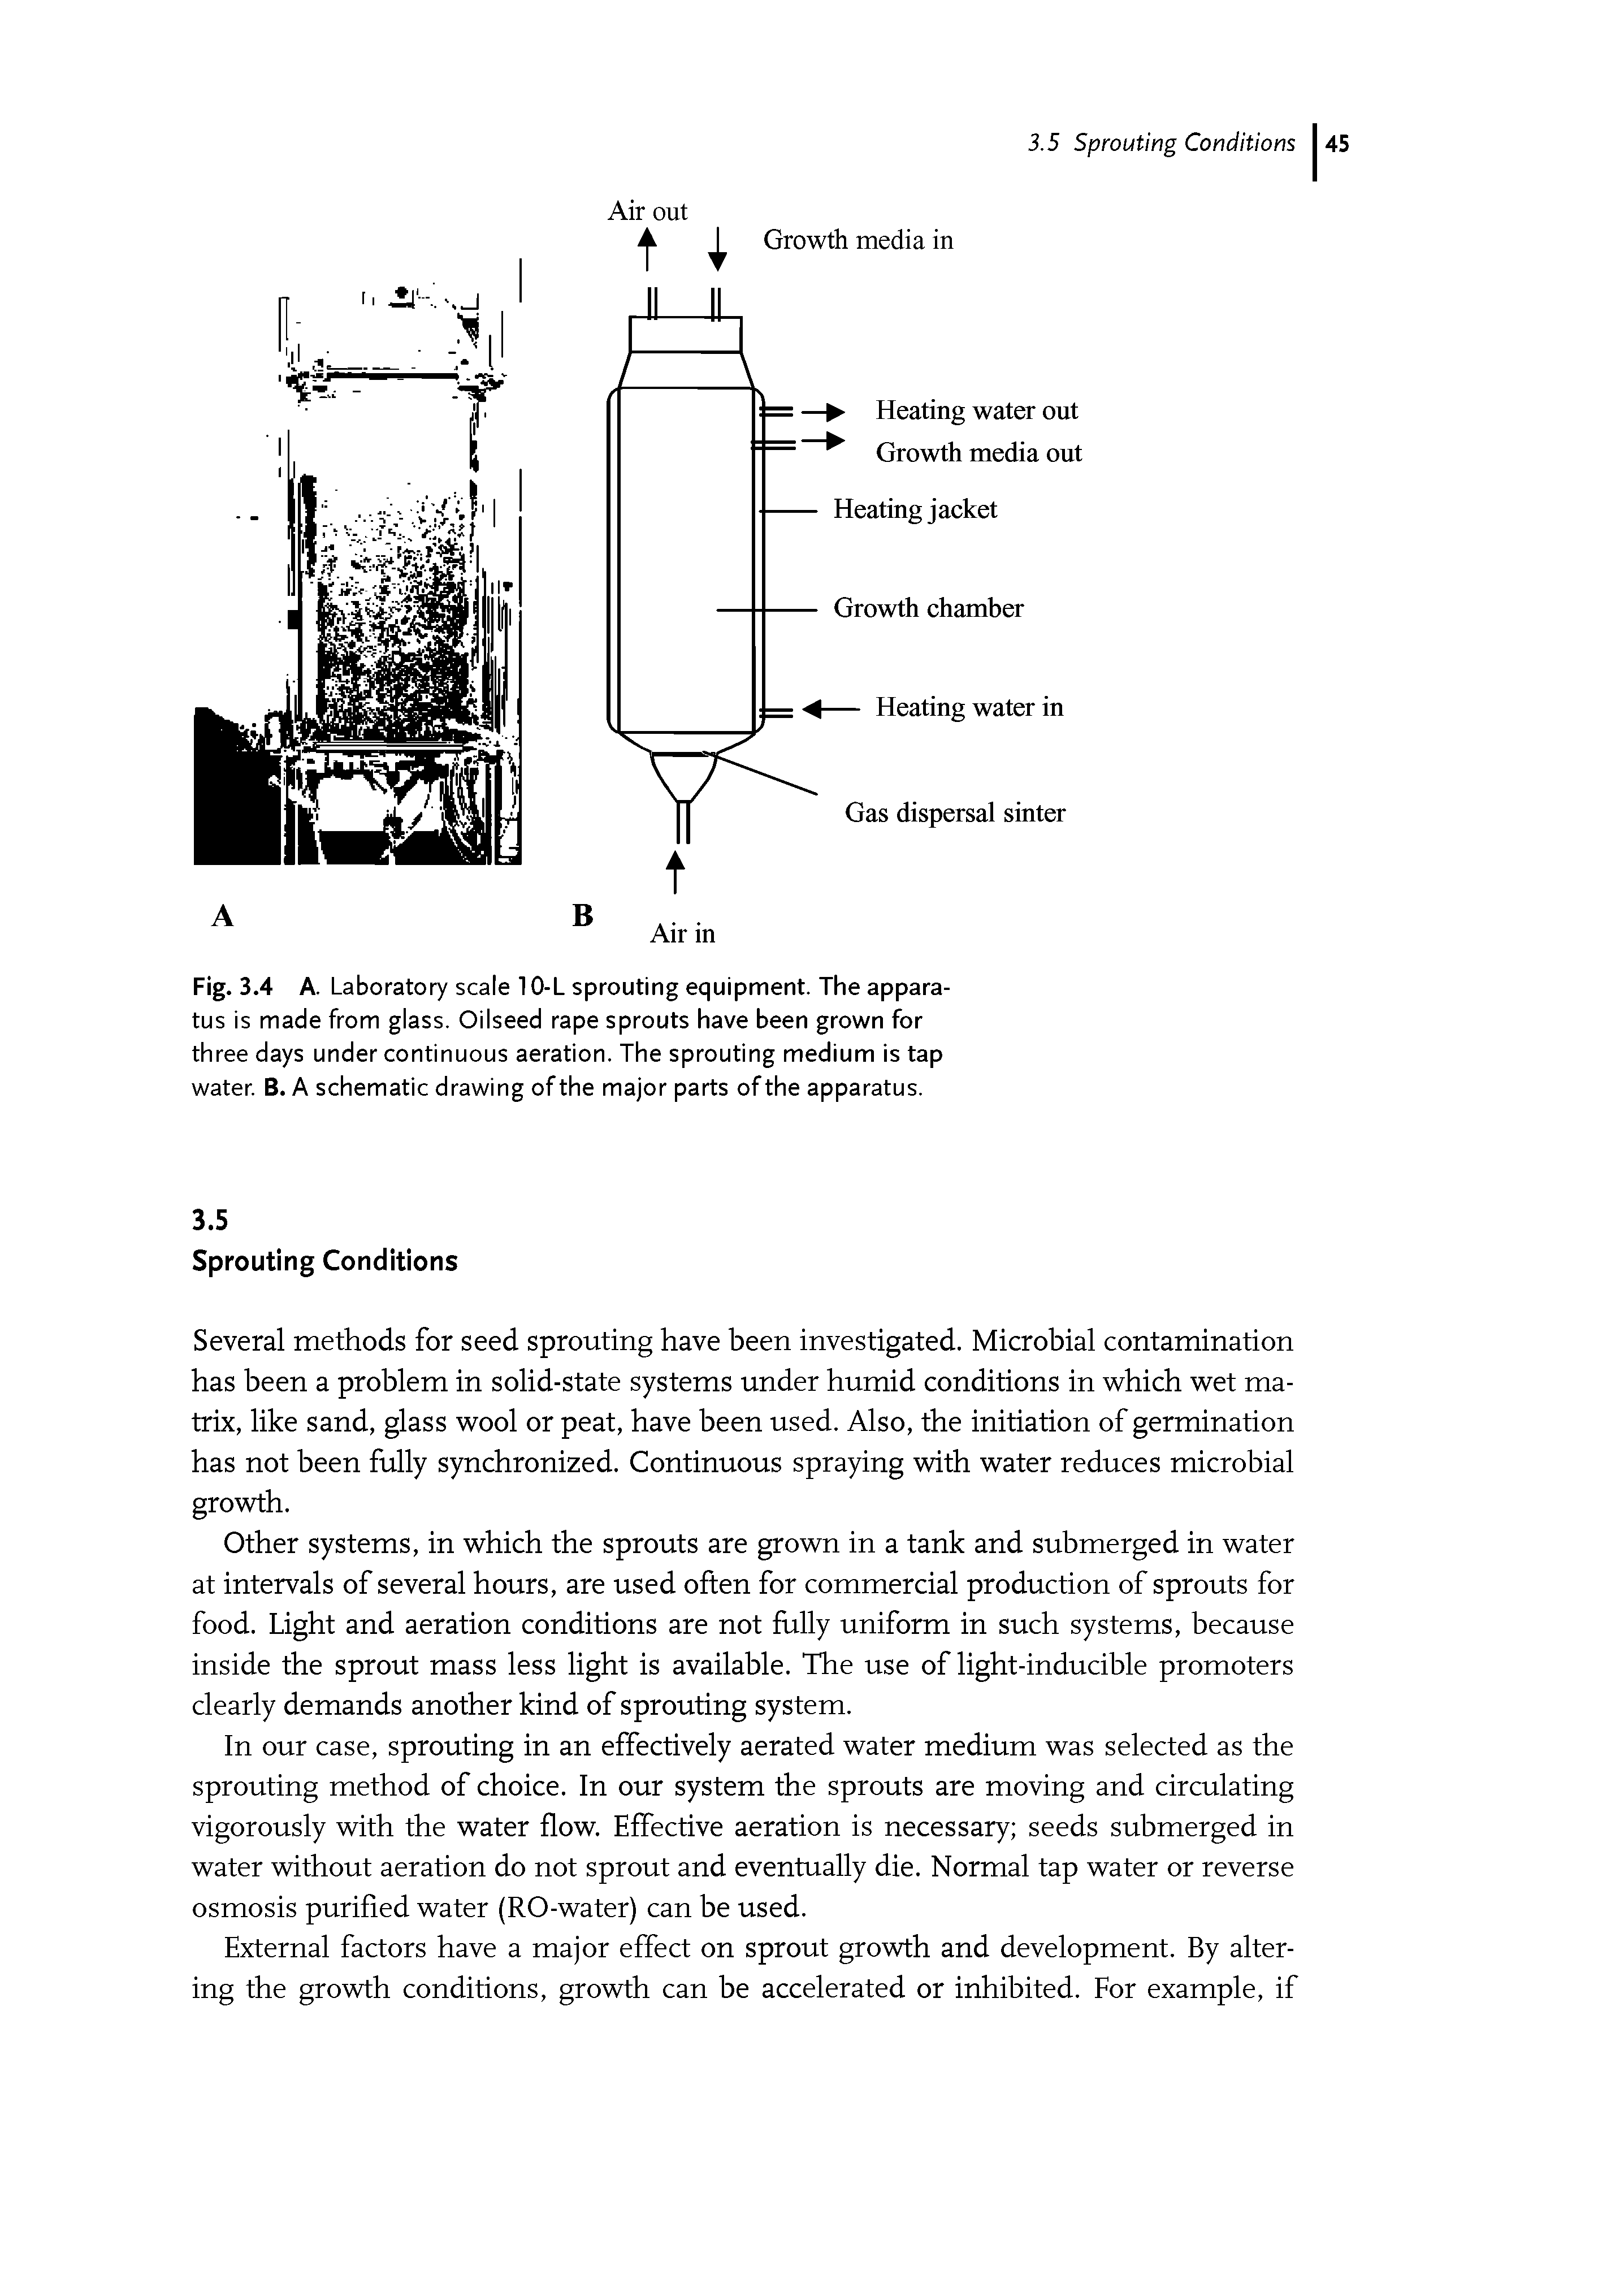 Fig. 3.4 A. Laboratory scale 10-L sprouting equipment. The apparatus is made from glass. Oilseed rape sprouts have been grown for three days under continuous aeration. The sprouting medium is tap water. B. A schematic drawing of the major parts of the apparatus.